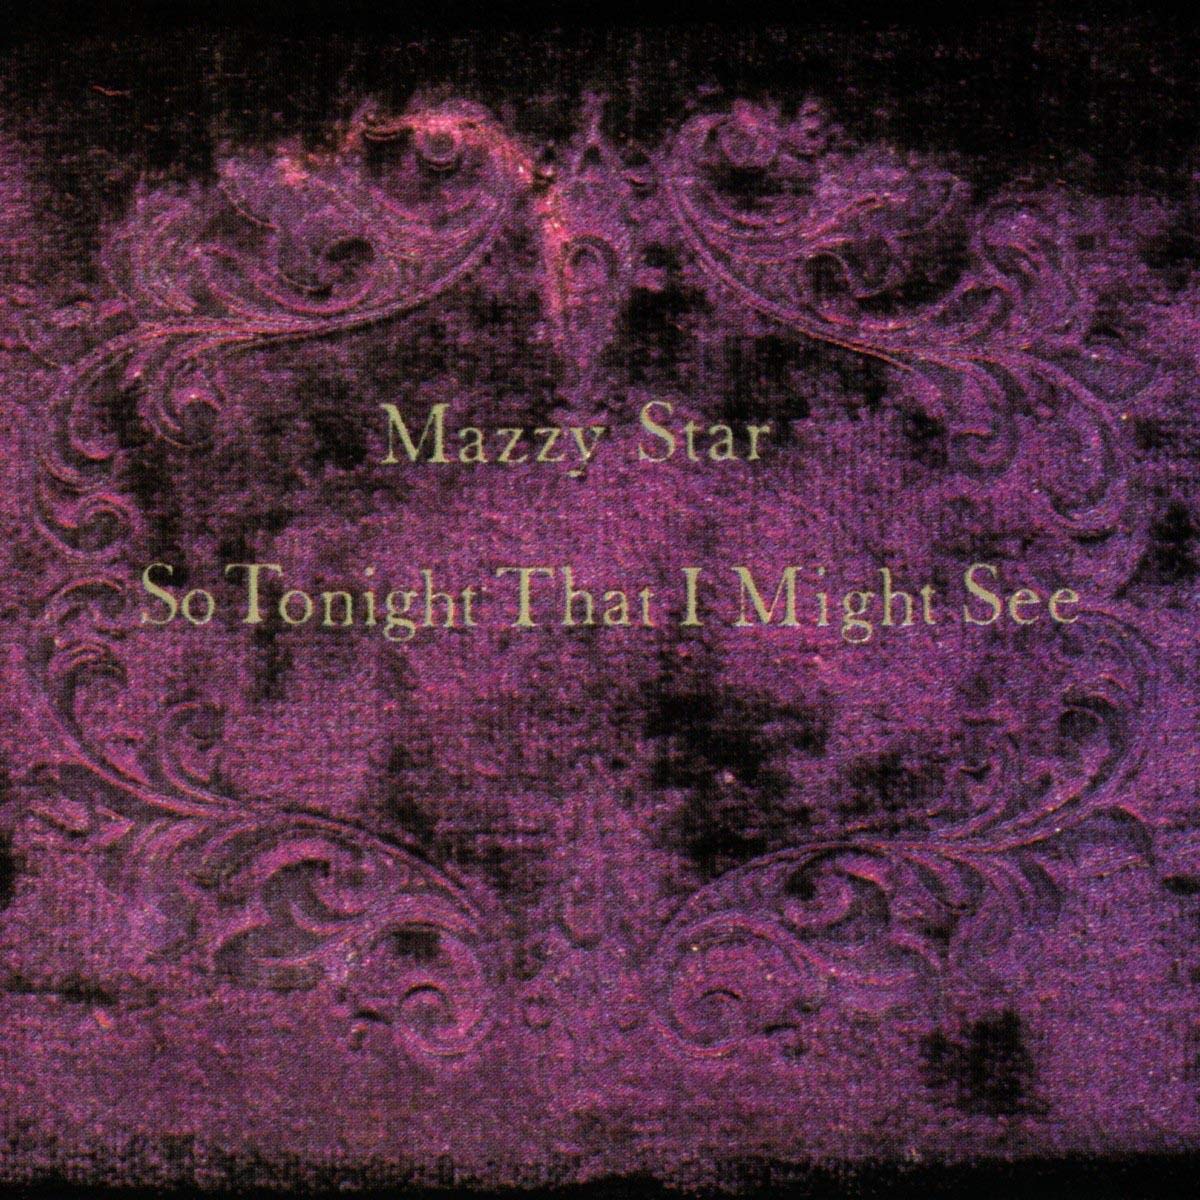 Mazzy Star ‎"So Tonight That I Might See" LP